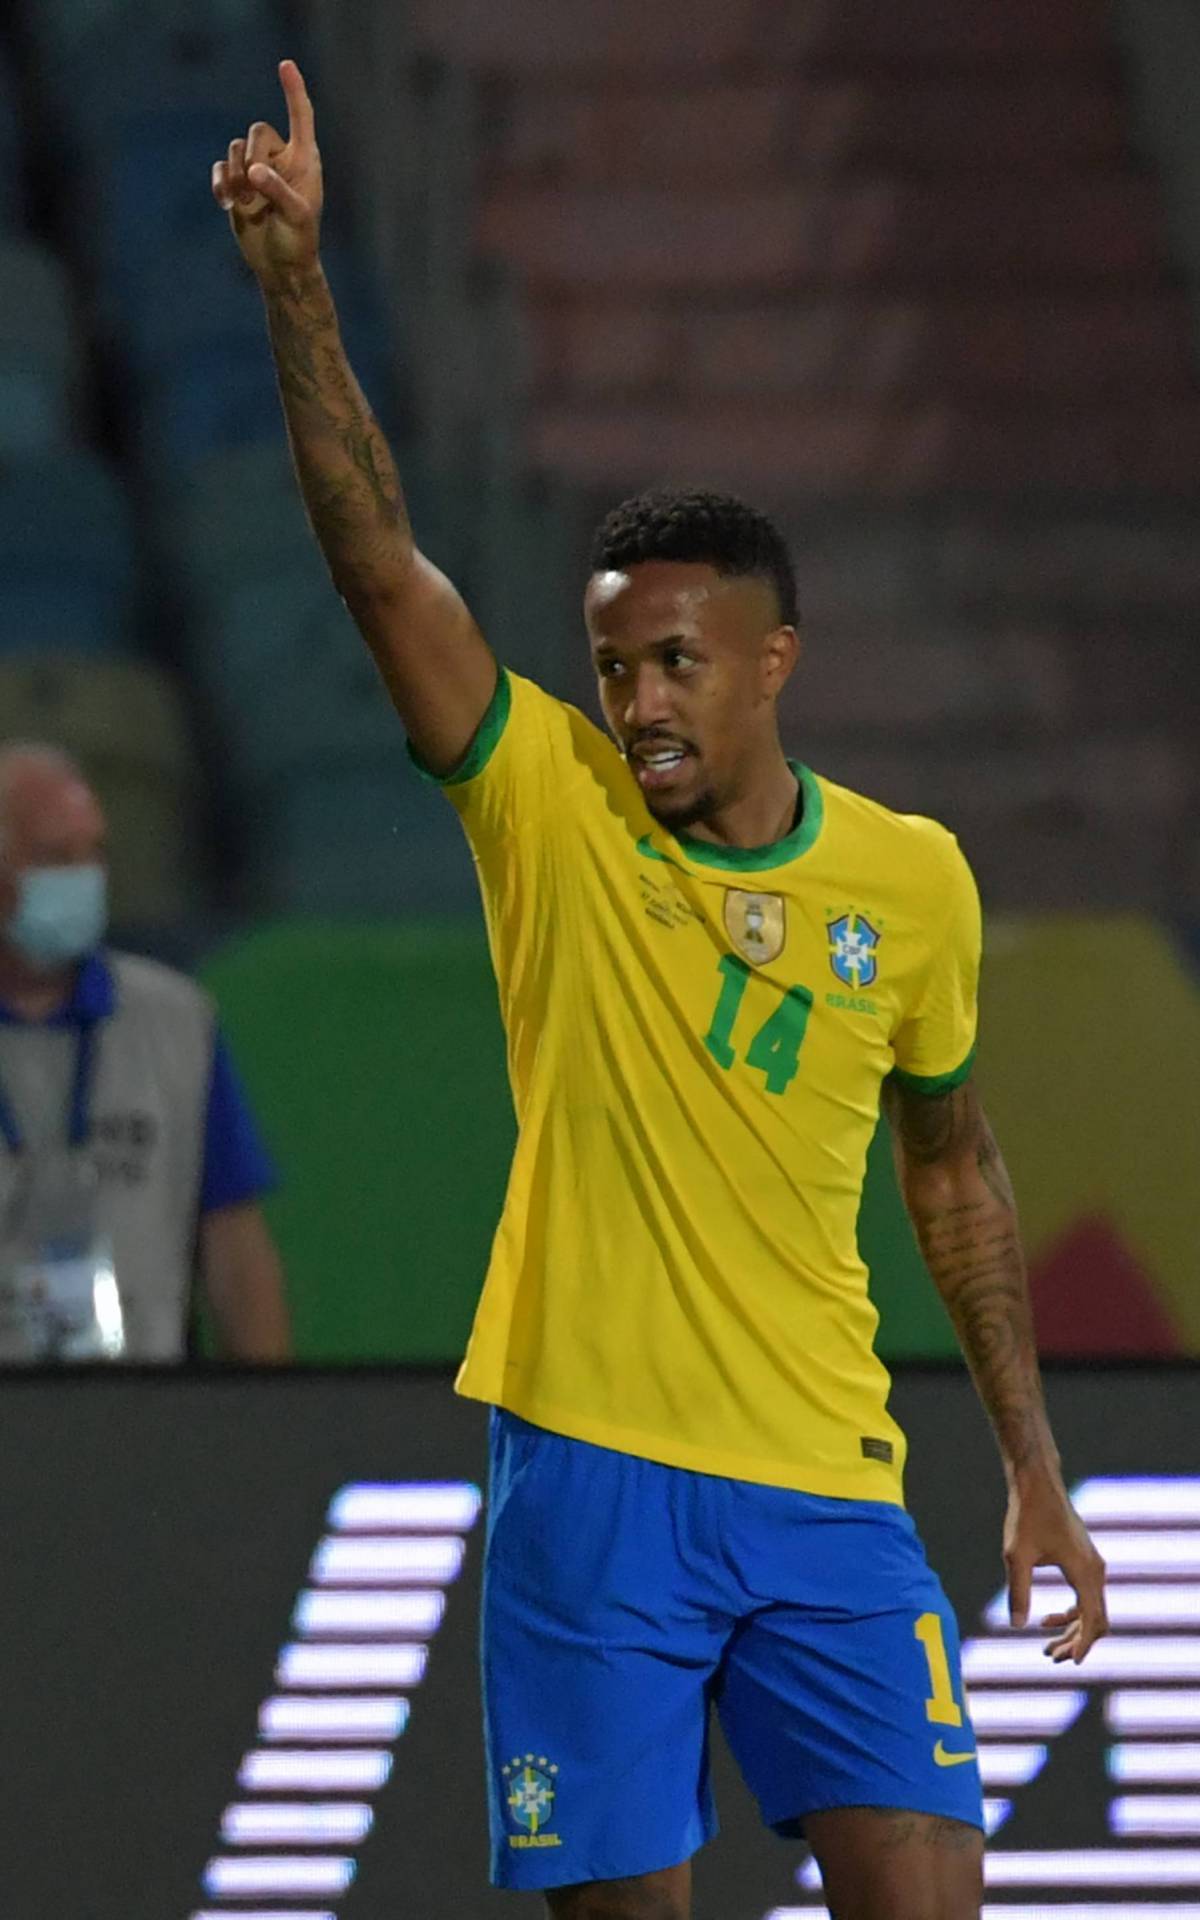 Brazil's Eder Militao celebrates after scoring against Ecuador during the Conmebol Copa America 2021 football tournament group phase match at the Olympic Stadium in Goiania, Brazil, on June 27, 2021. (Photo by NELSON ALMEIDA / AFP) - AFP